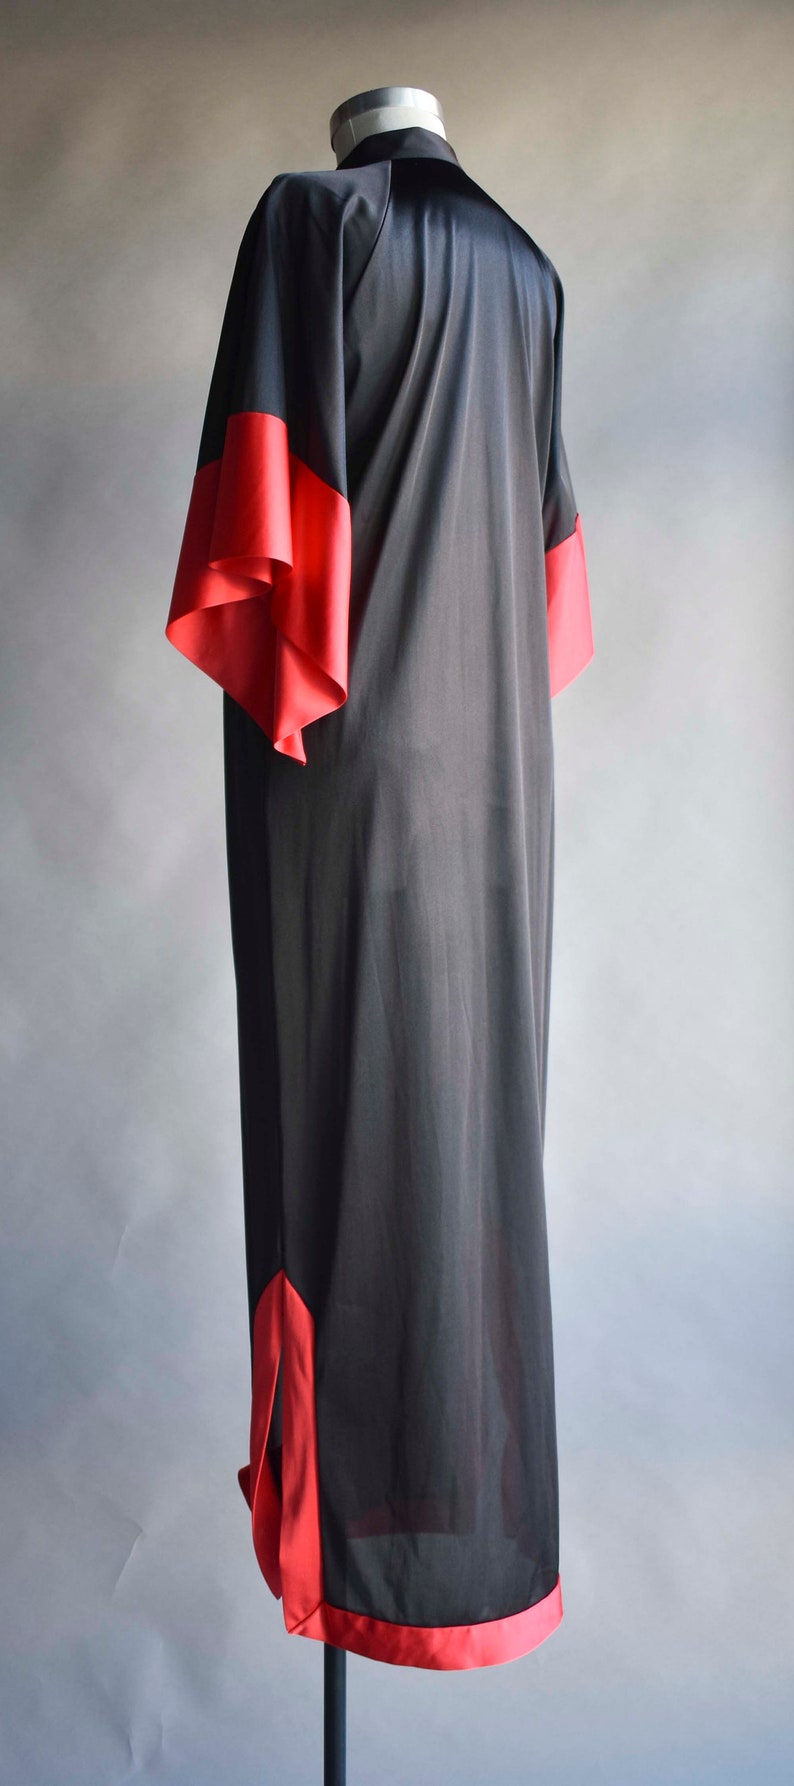 Vintage 70s Black and Red Nightgown / 70s Long Nightgown / Gothic Vintage Nightgown / Red and Black / Black and Red Nightgown / 70s robe image 7